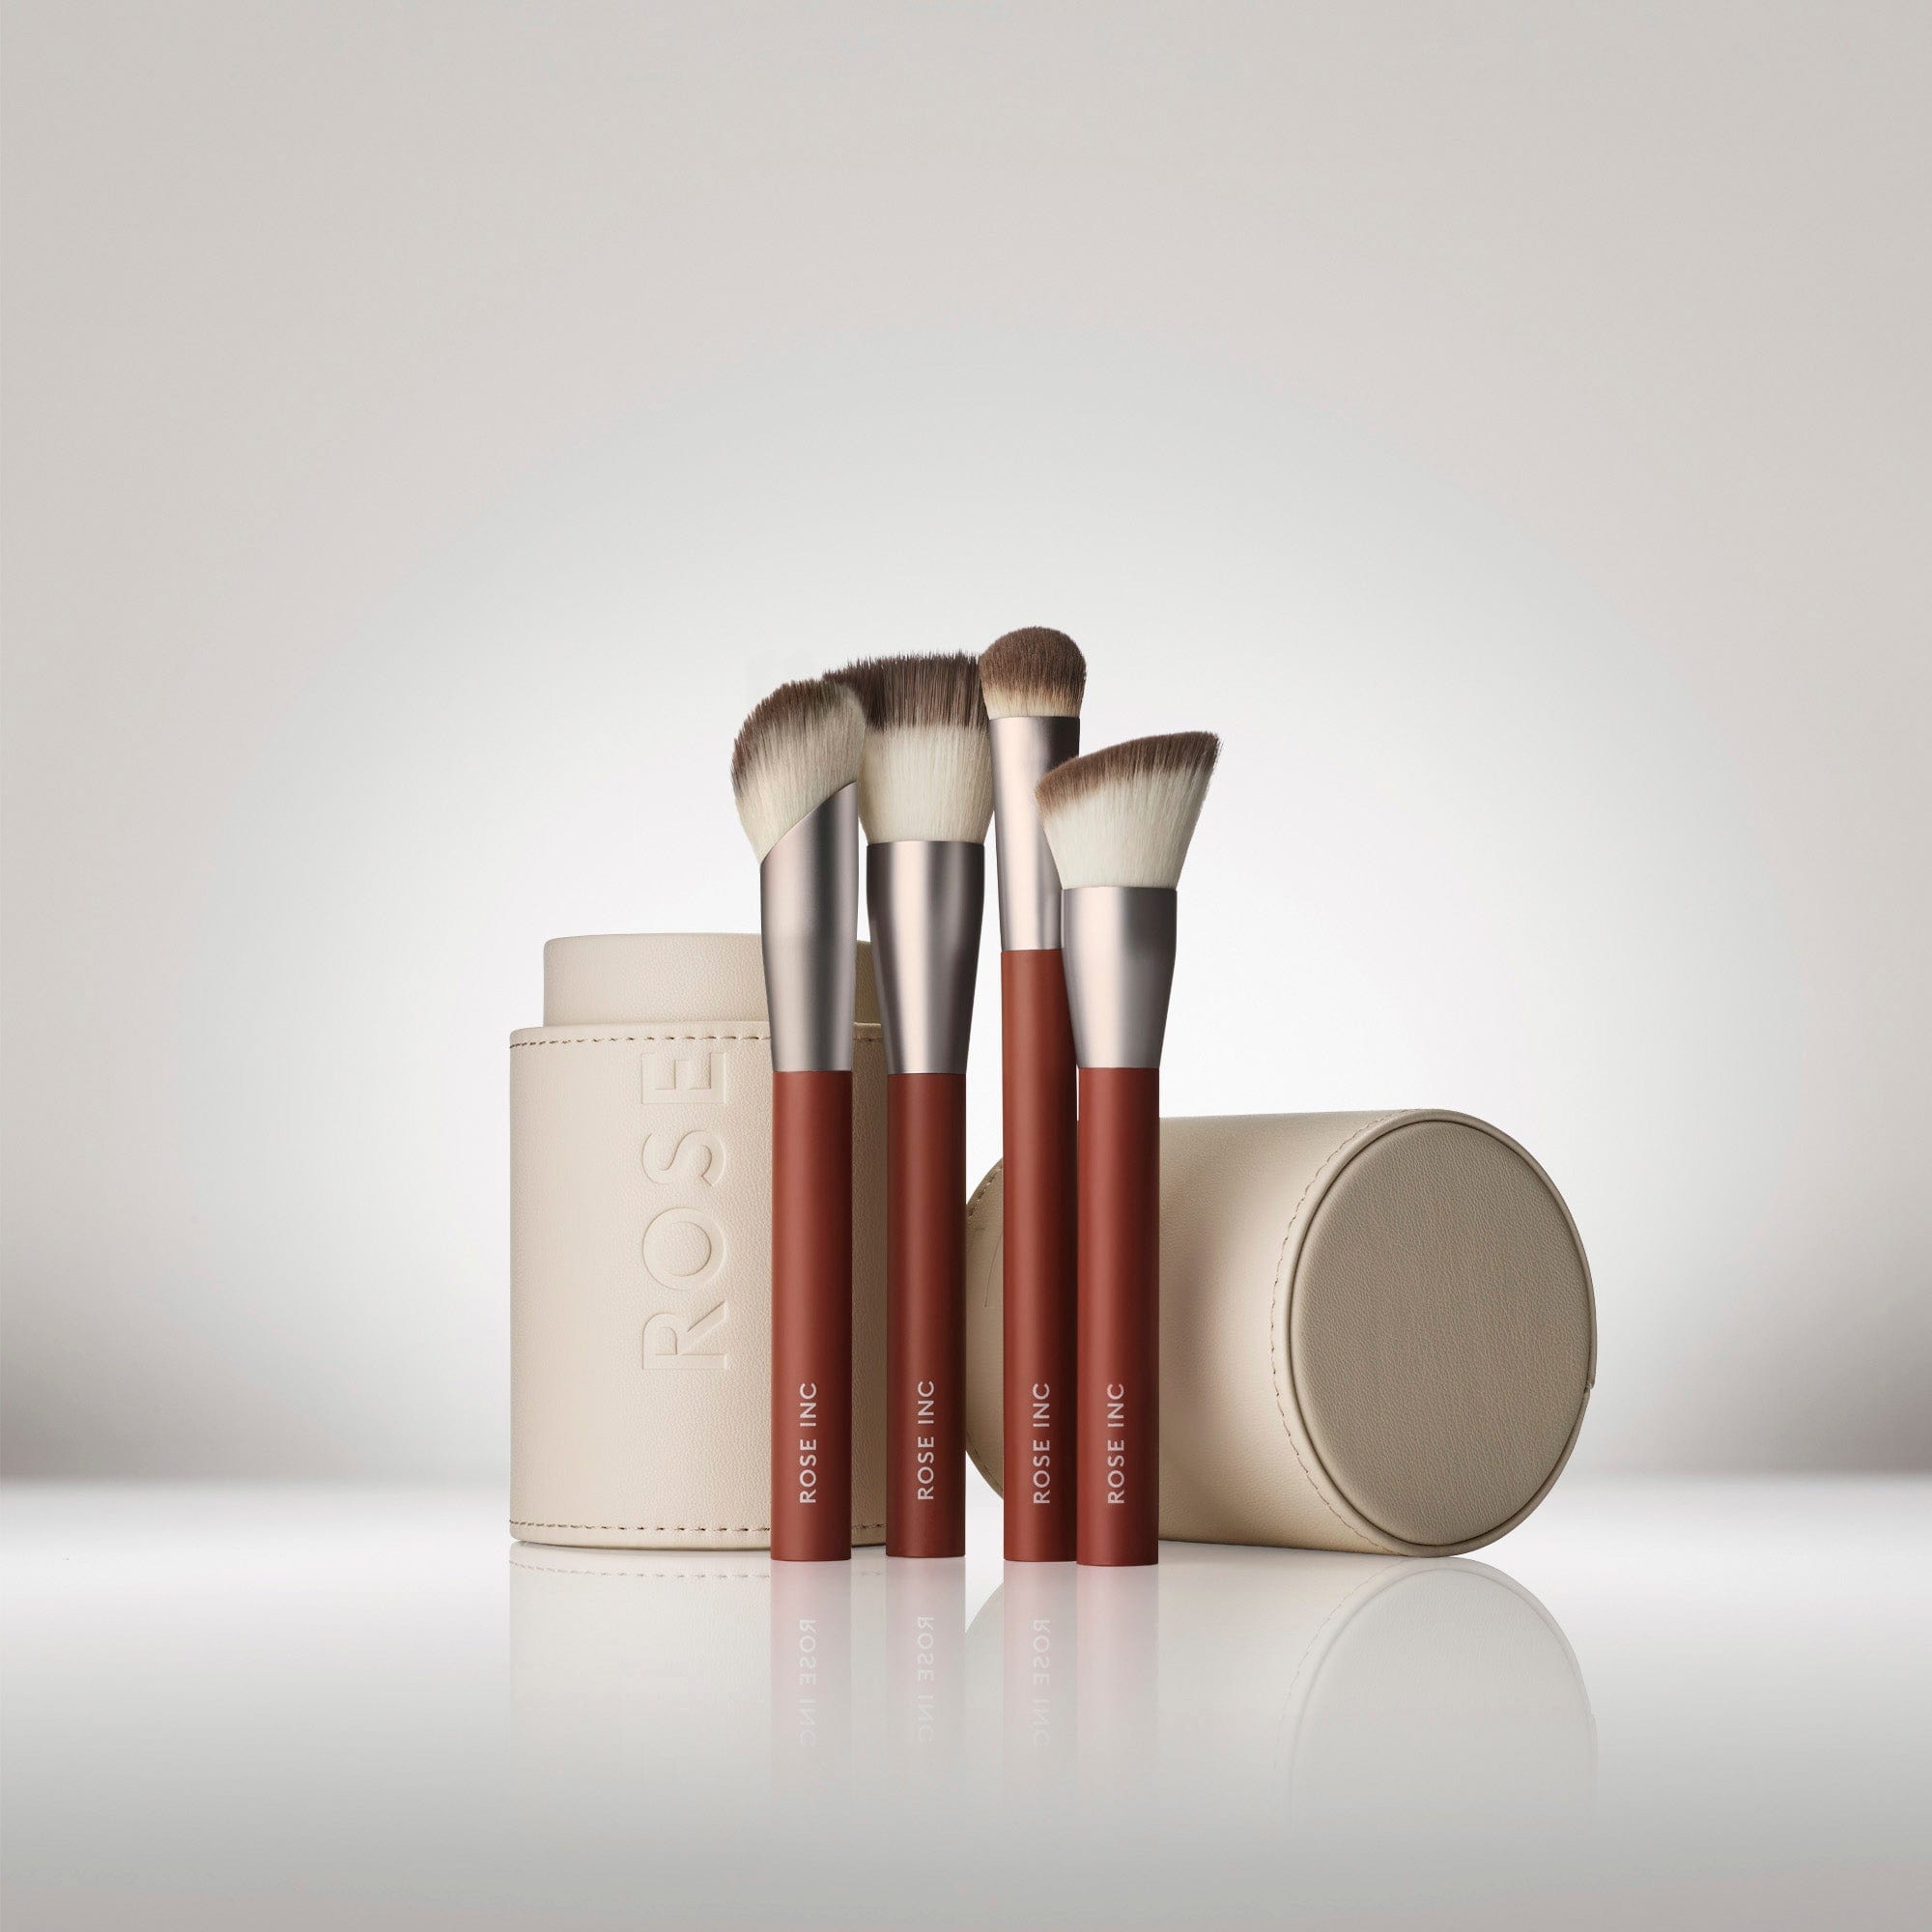 The Complexion Brush gift featuring 4 brushes and a Signature Makeup brush case.